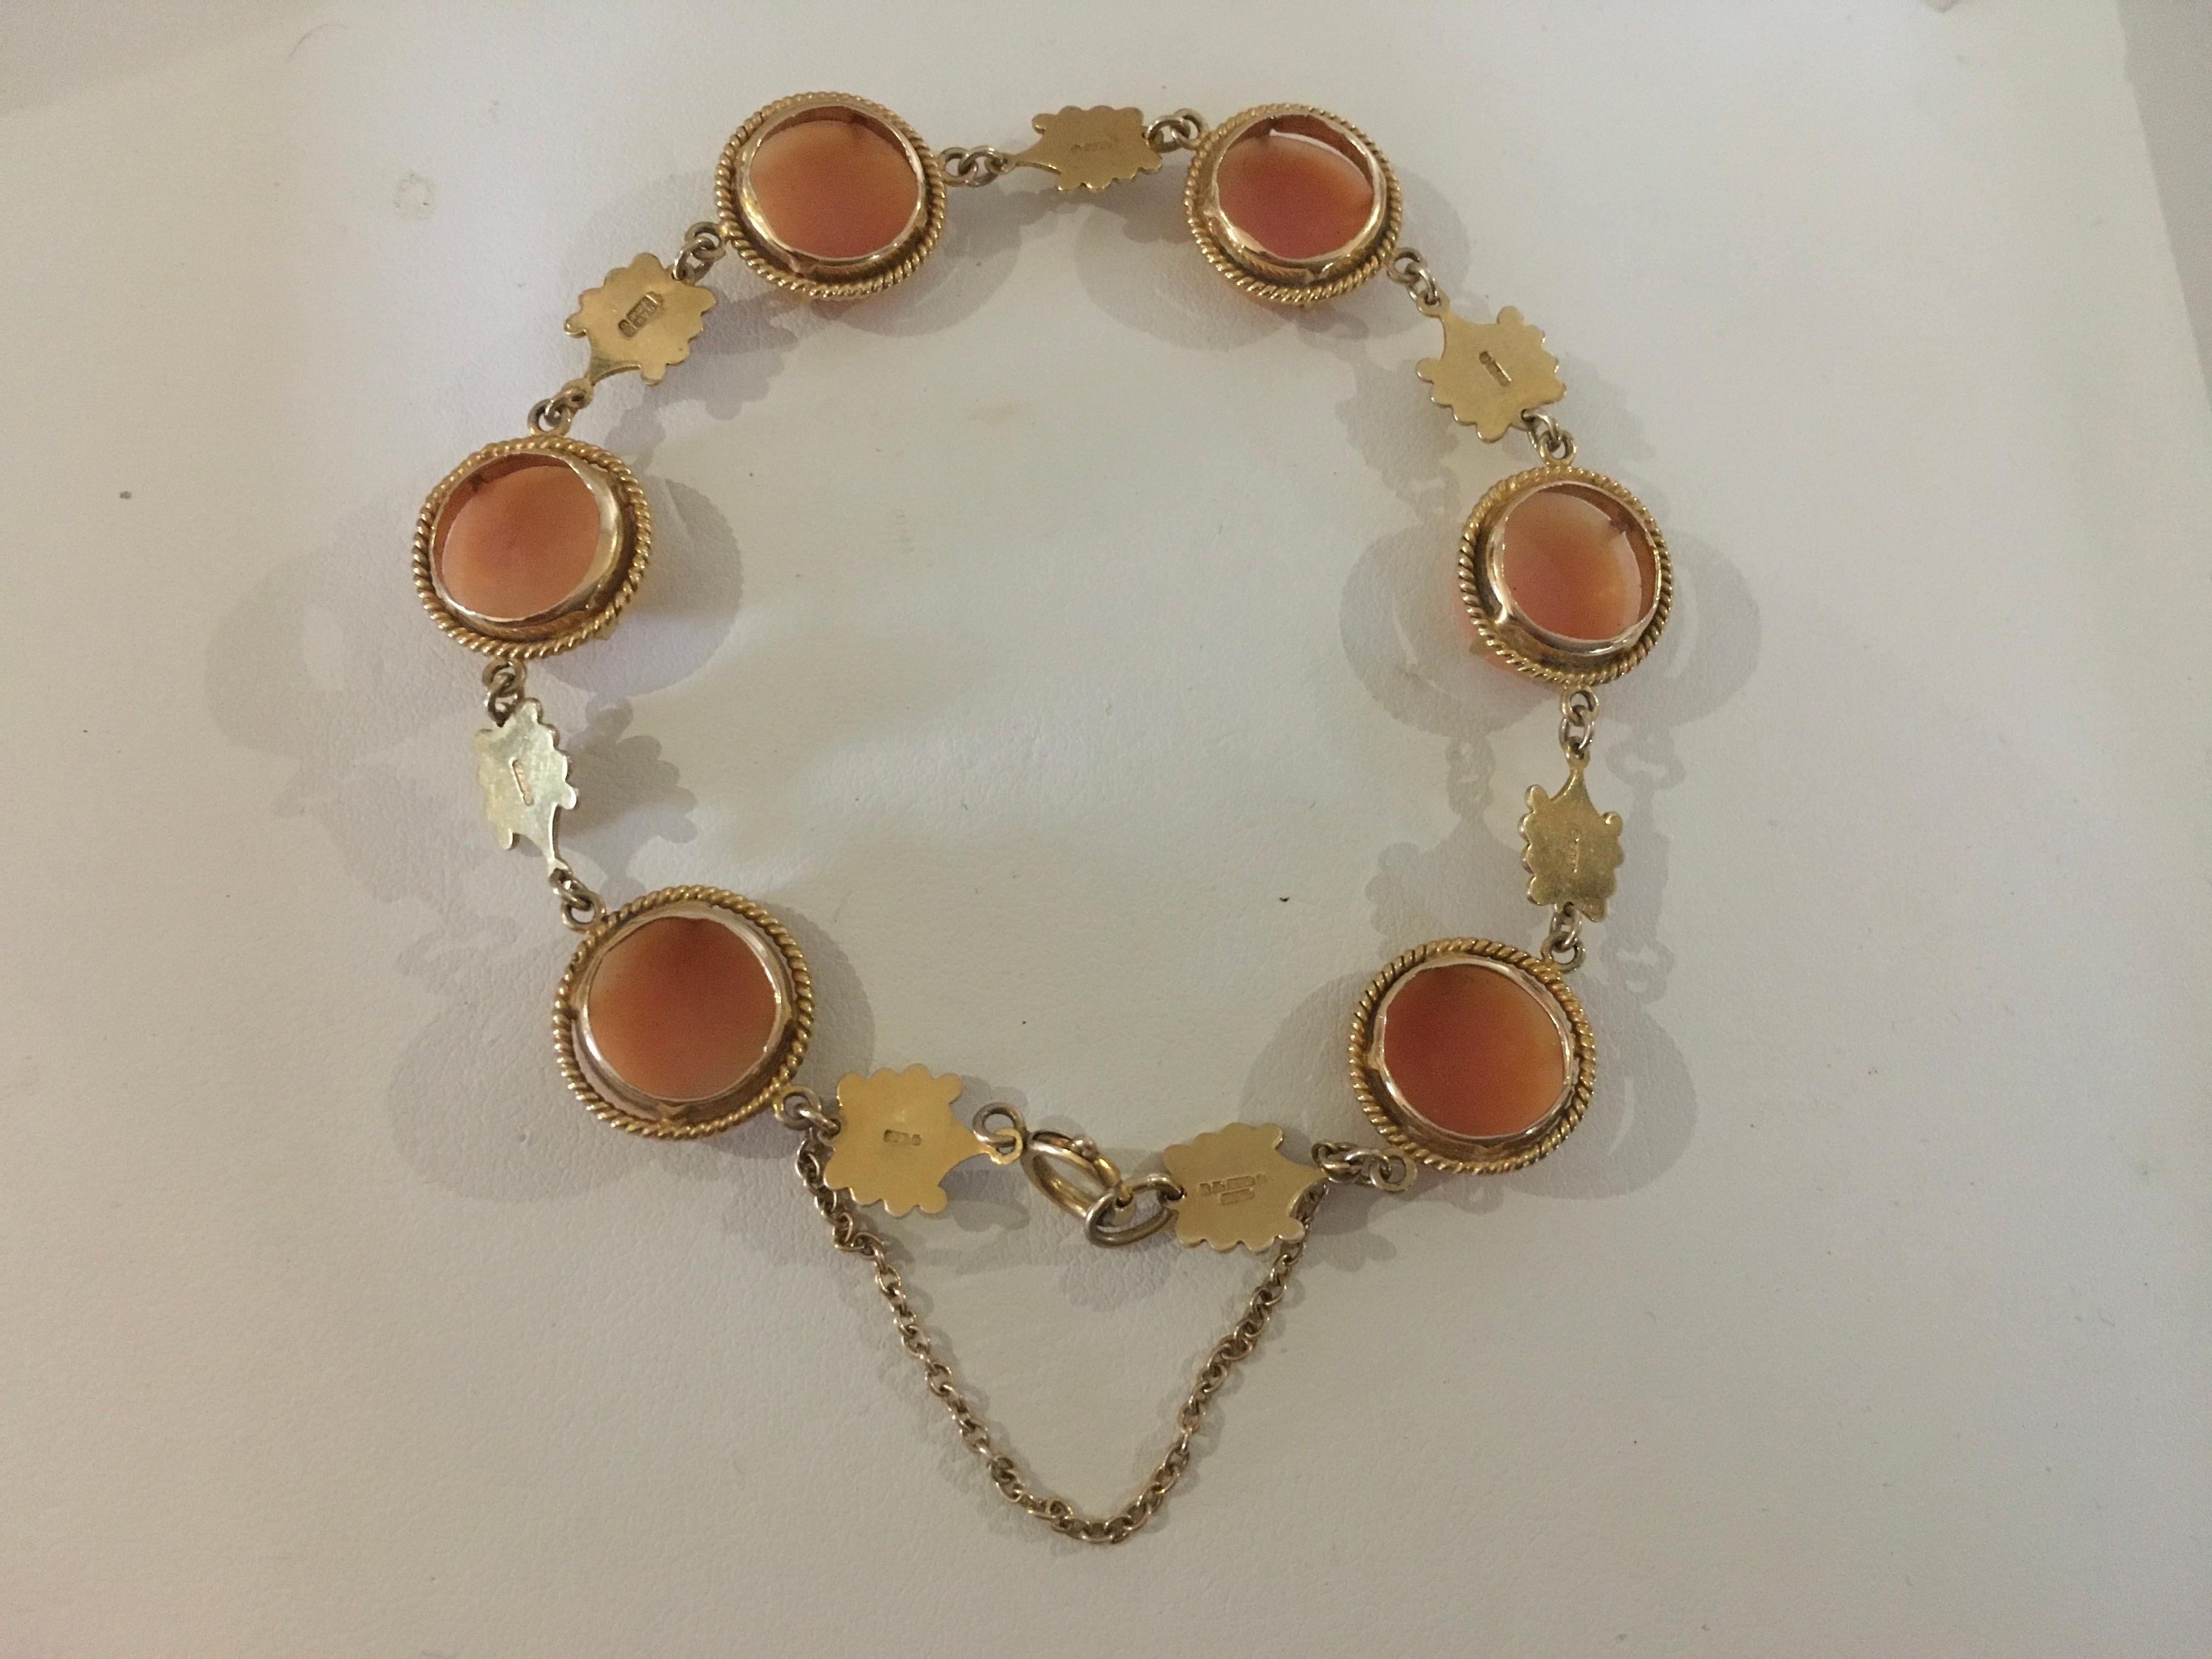 Women's Vintage 1960’s Gold and Cameo Bracelet